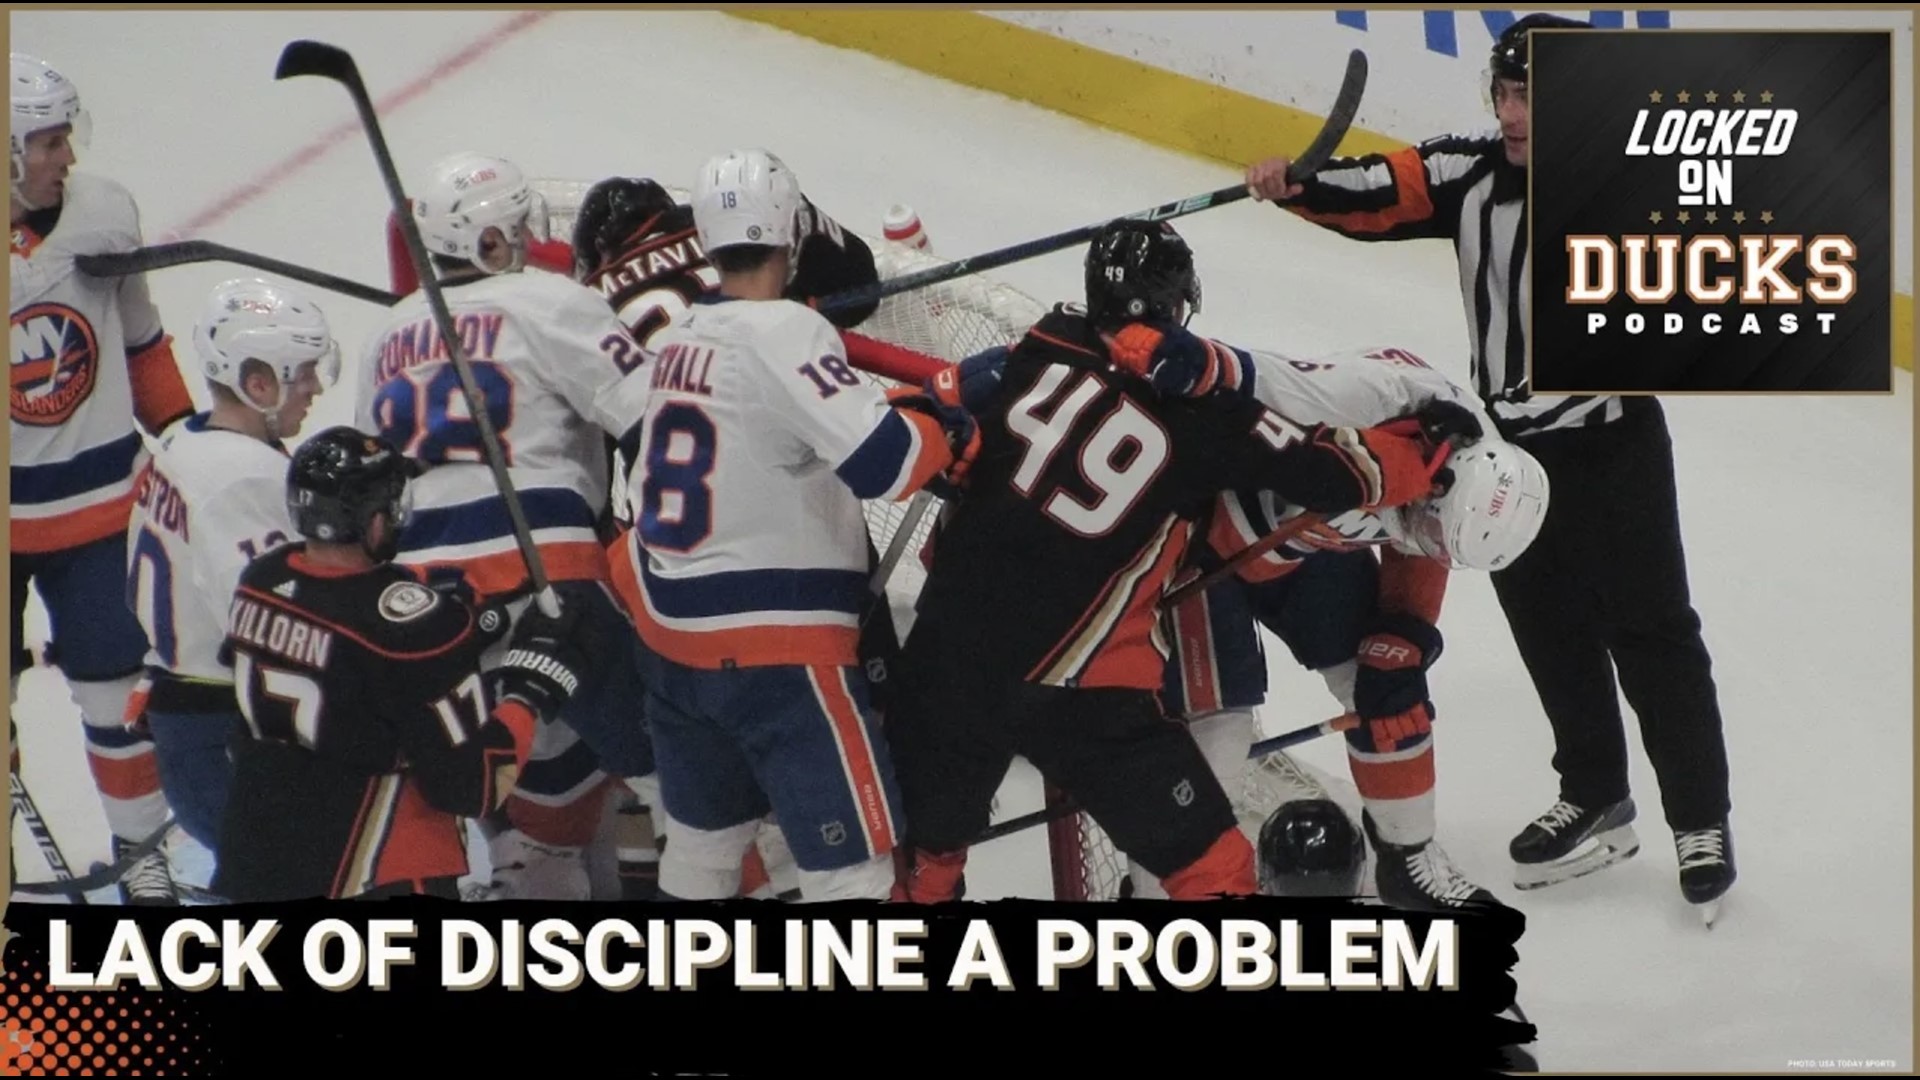 While we can revel in the fights that took place in Chicago, the Ducks still have an underlying problem with keeping their cool, and committing bad penalties.